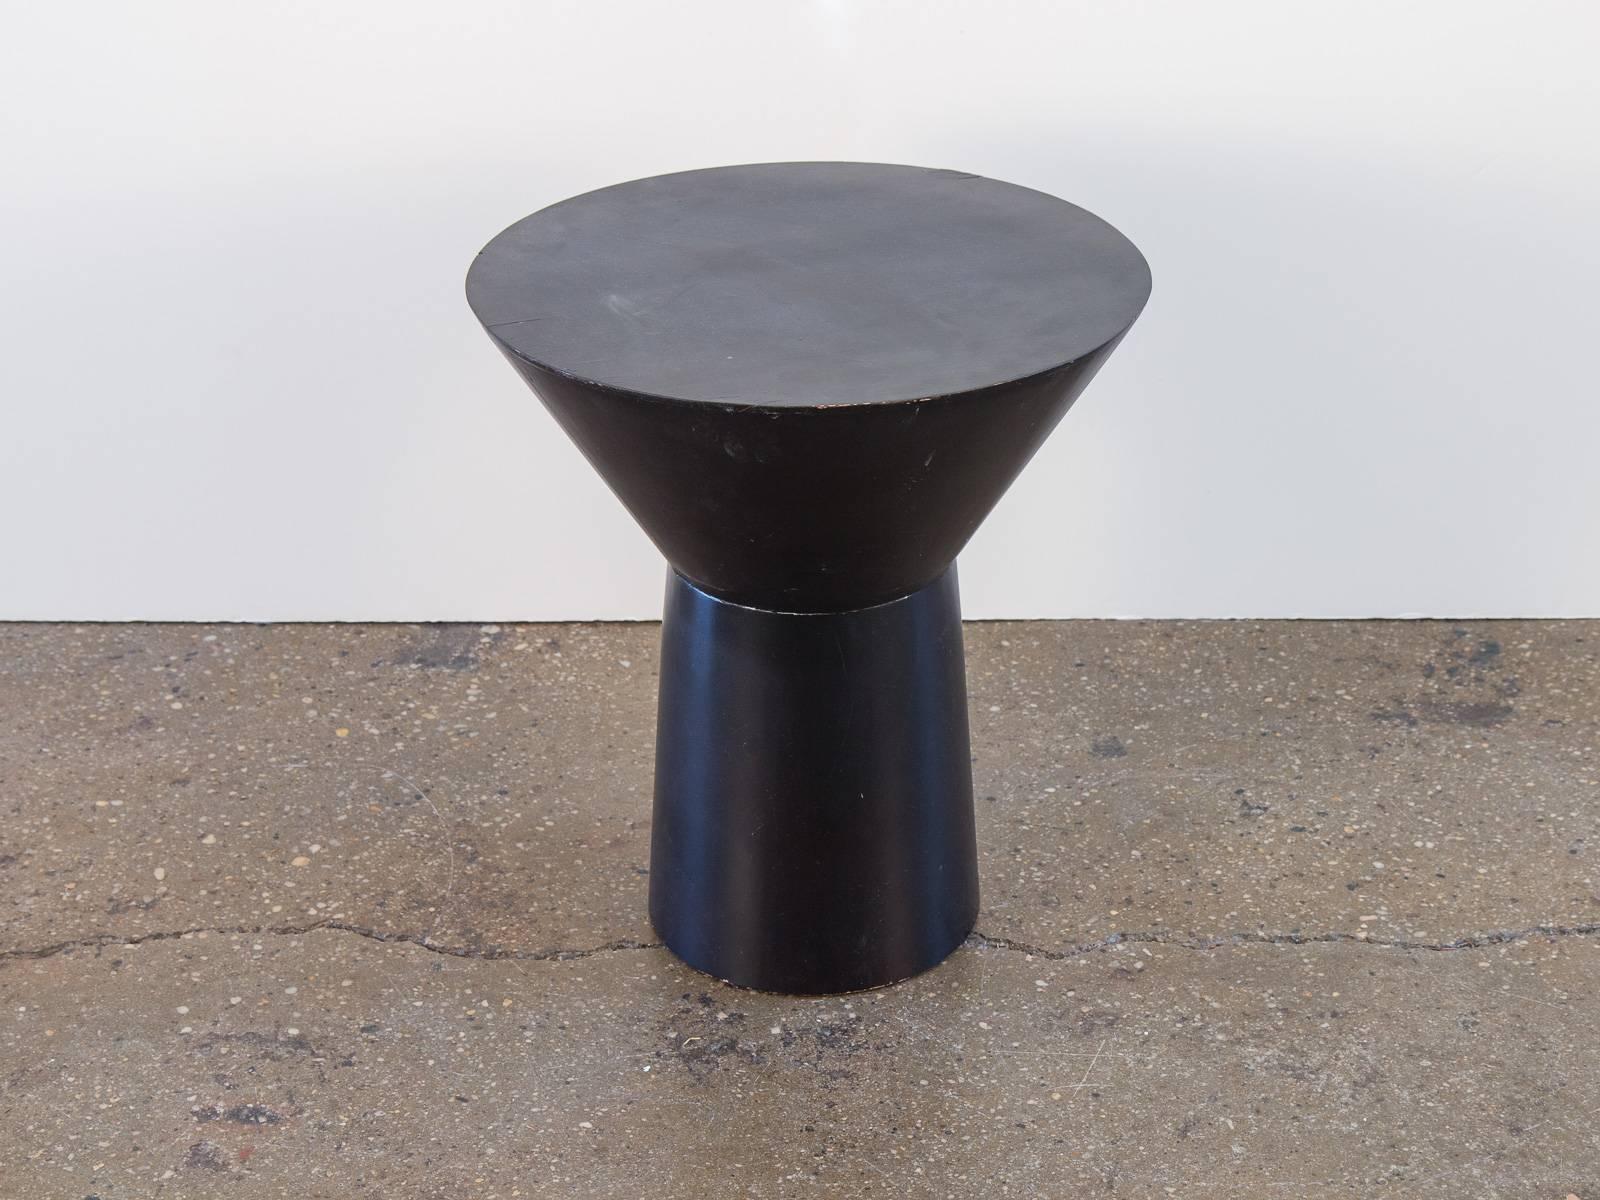 A black pedestal ideal for displaying art or a plant, or for use as a side table. Appealing conic Memphis shape. In vintage condition with some superficial wear (it will look great with a new coat of paint).

Measures: 20